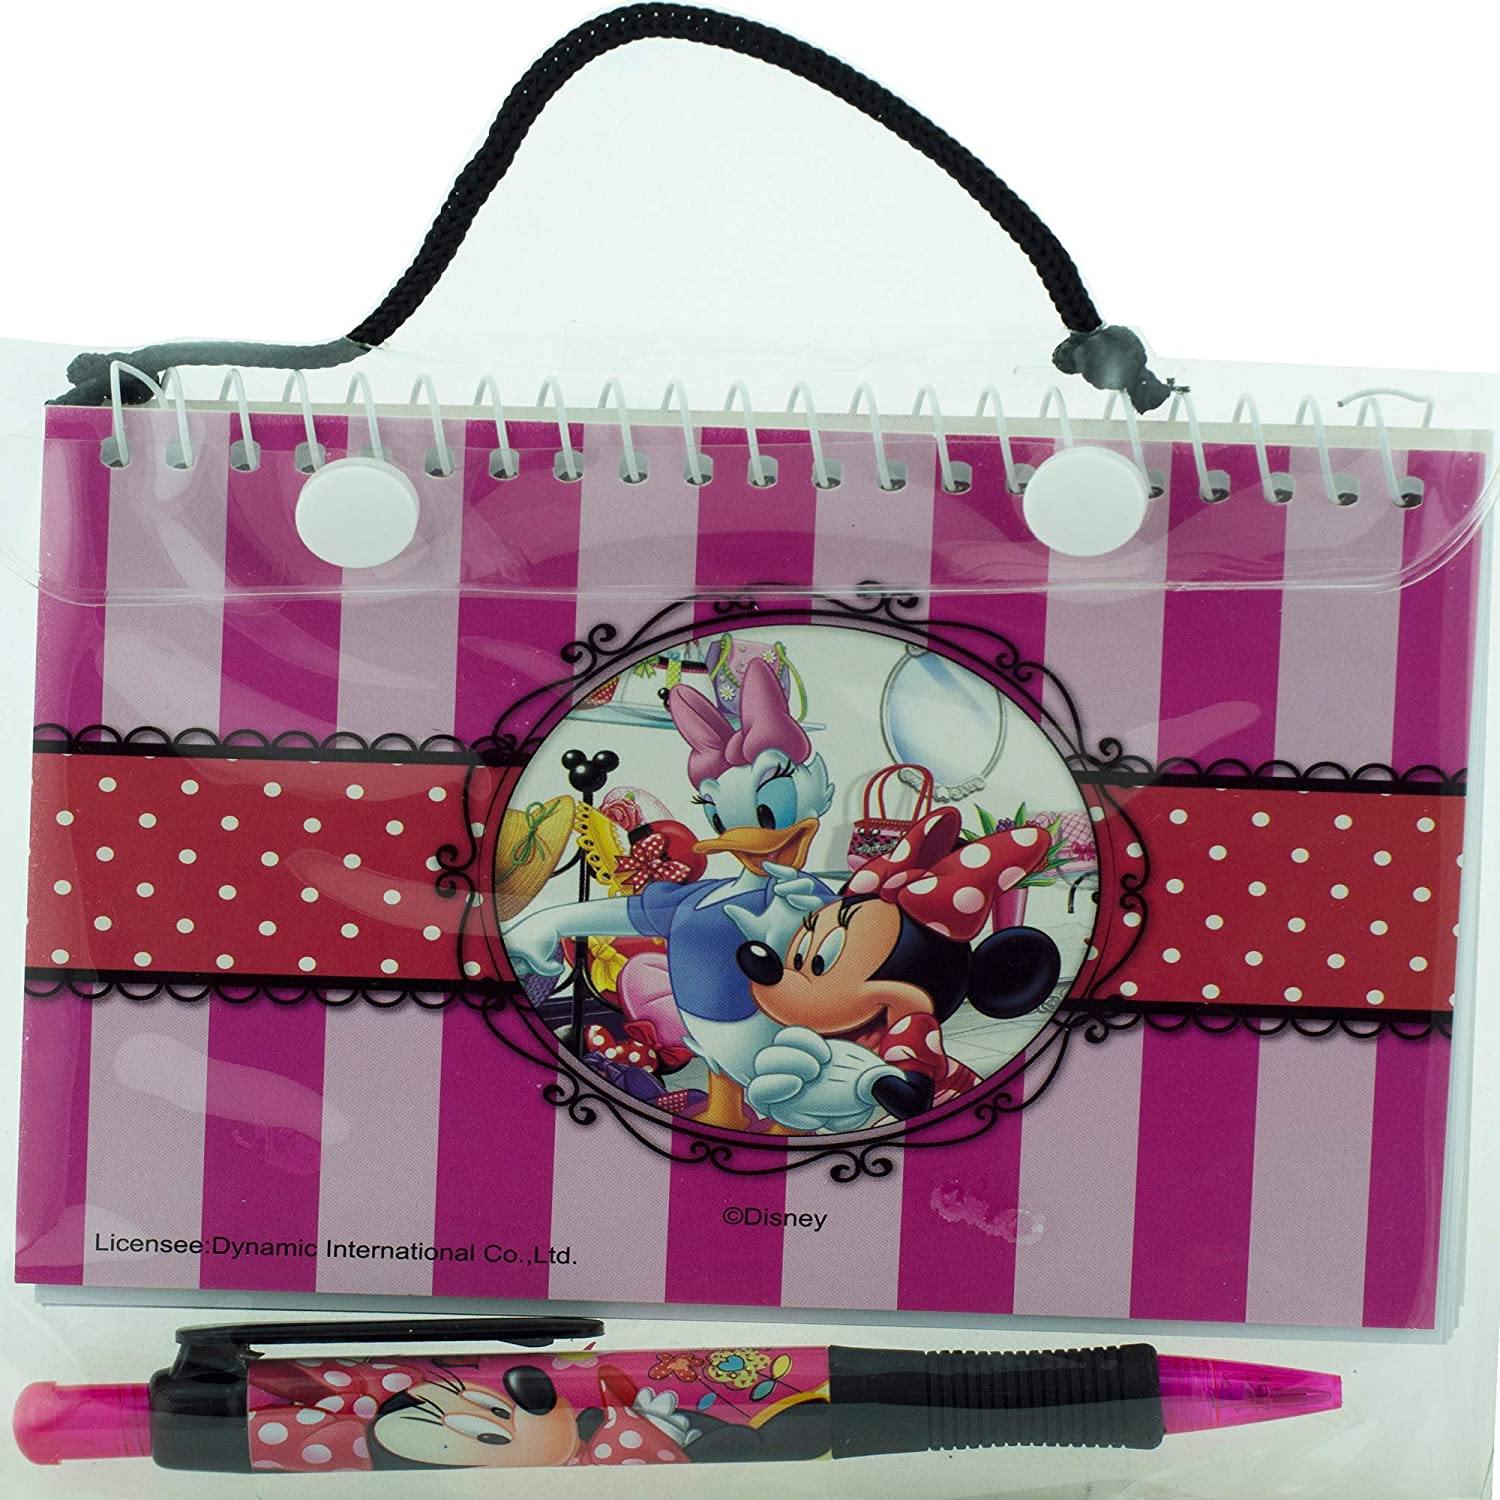 Minnie Mouse Pink Autograph Book With Pen